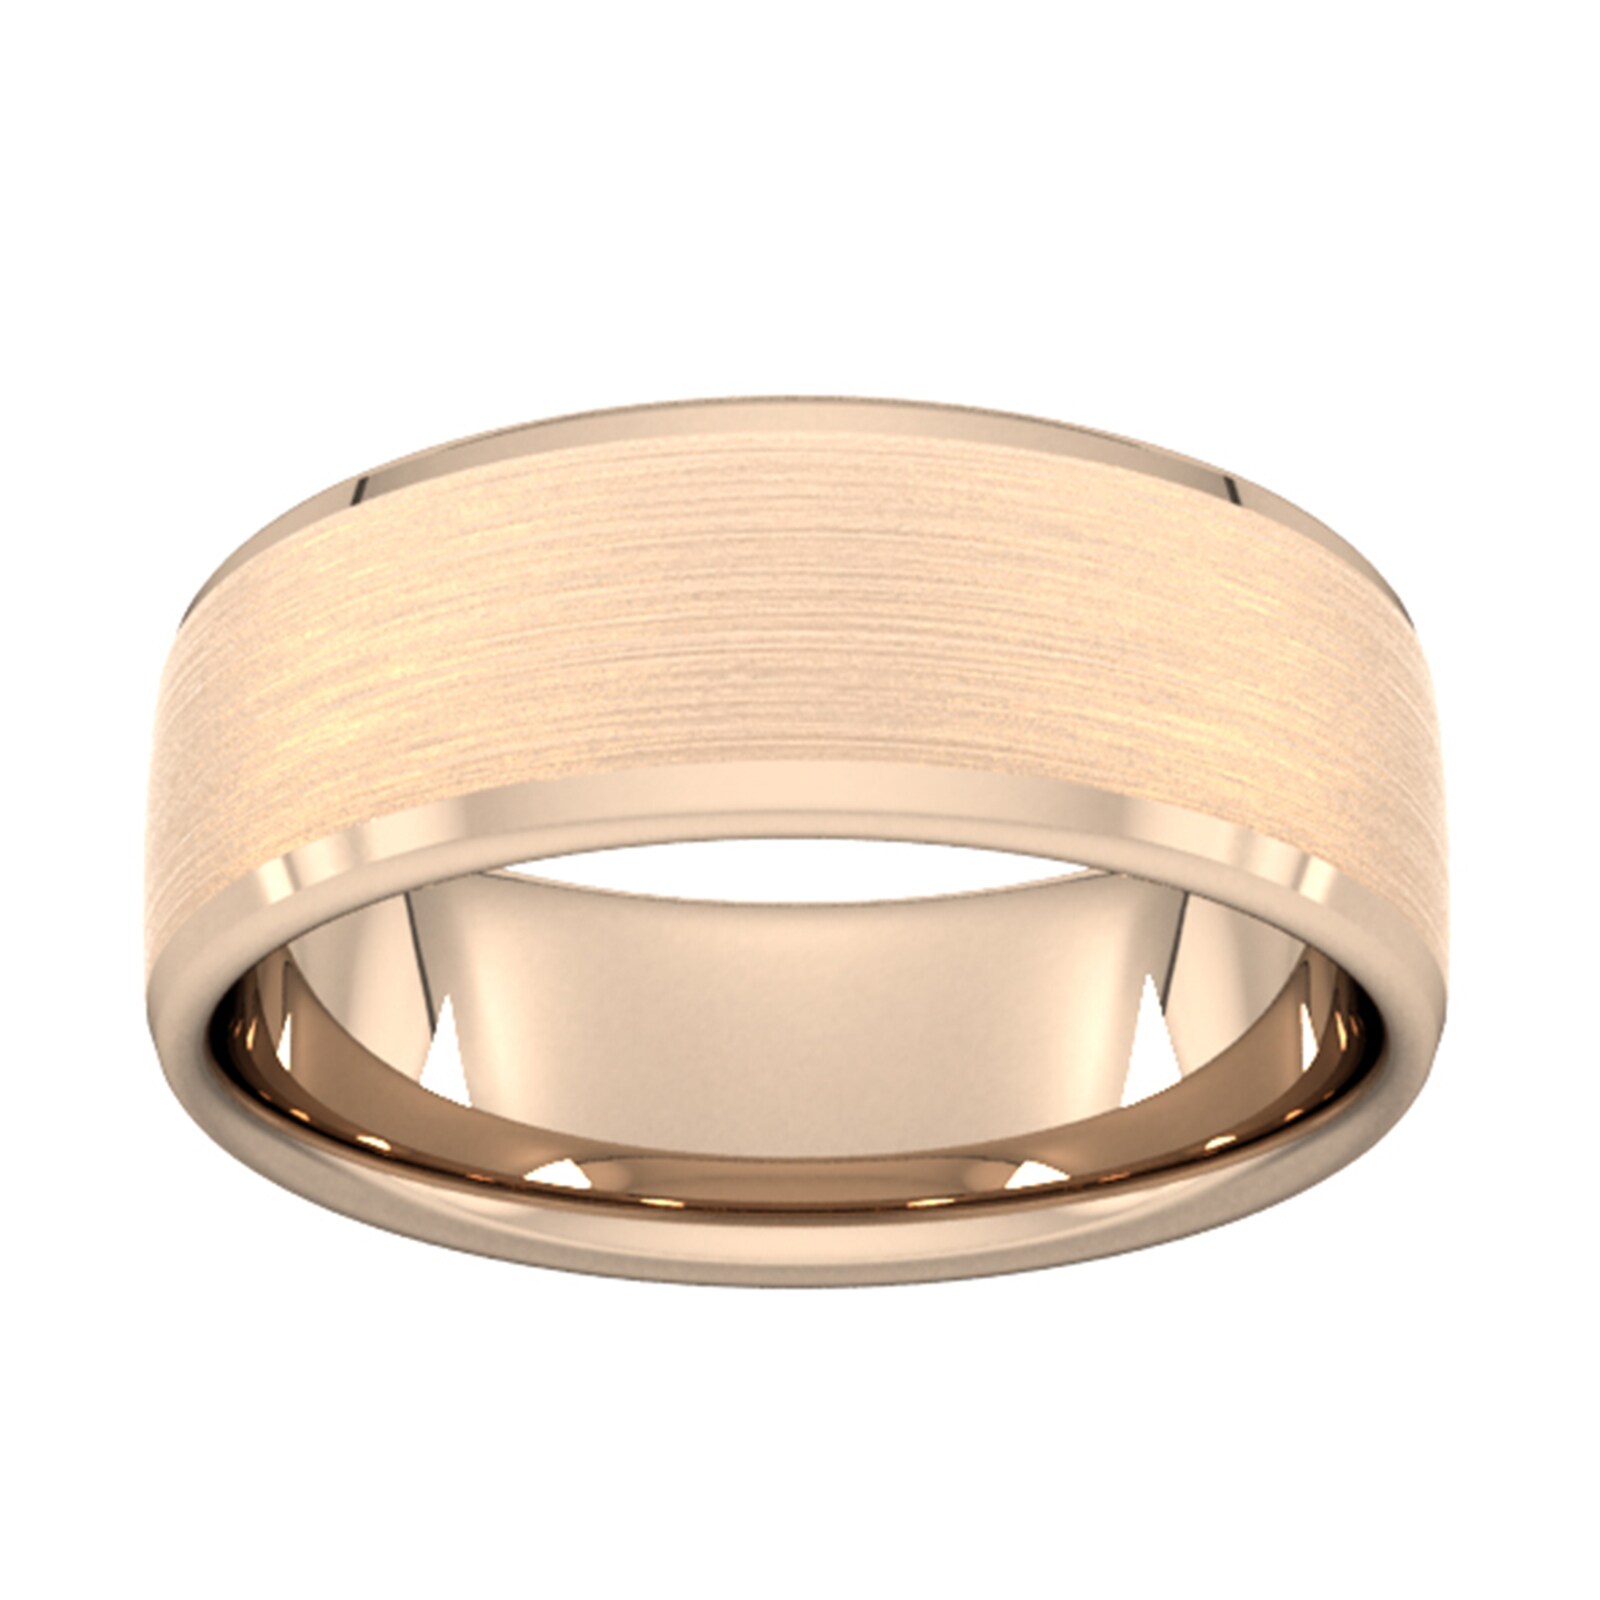 8mm D Shape Standard Polished Chamfered Edges With Matt Centre Wedding Ring In 9 Carat Rose Gold - Ring Size N